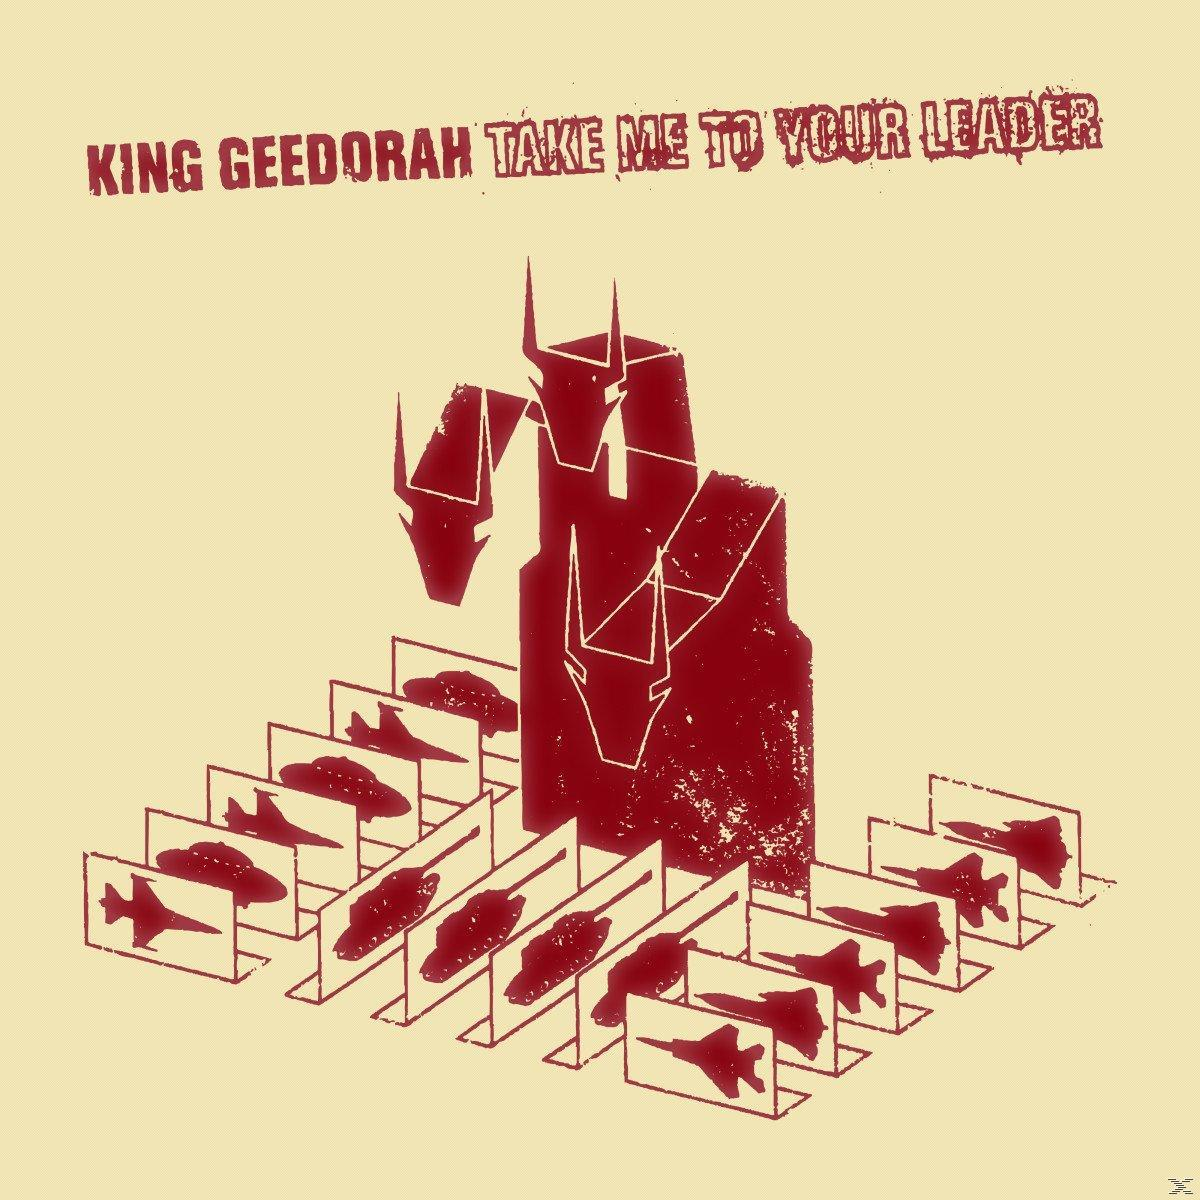 - Reissue) Take 2LP+MP3 Geedorah Me Download) King Leader To - + (Coloured Your (LP